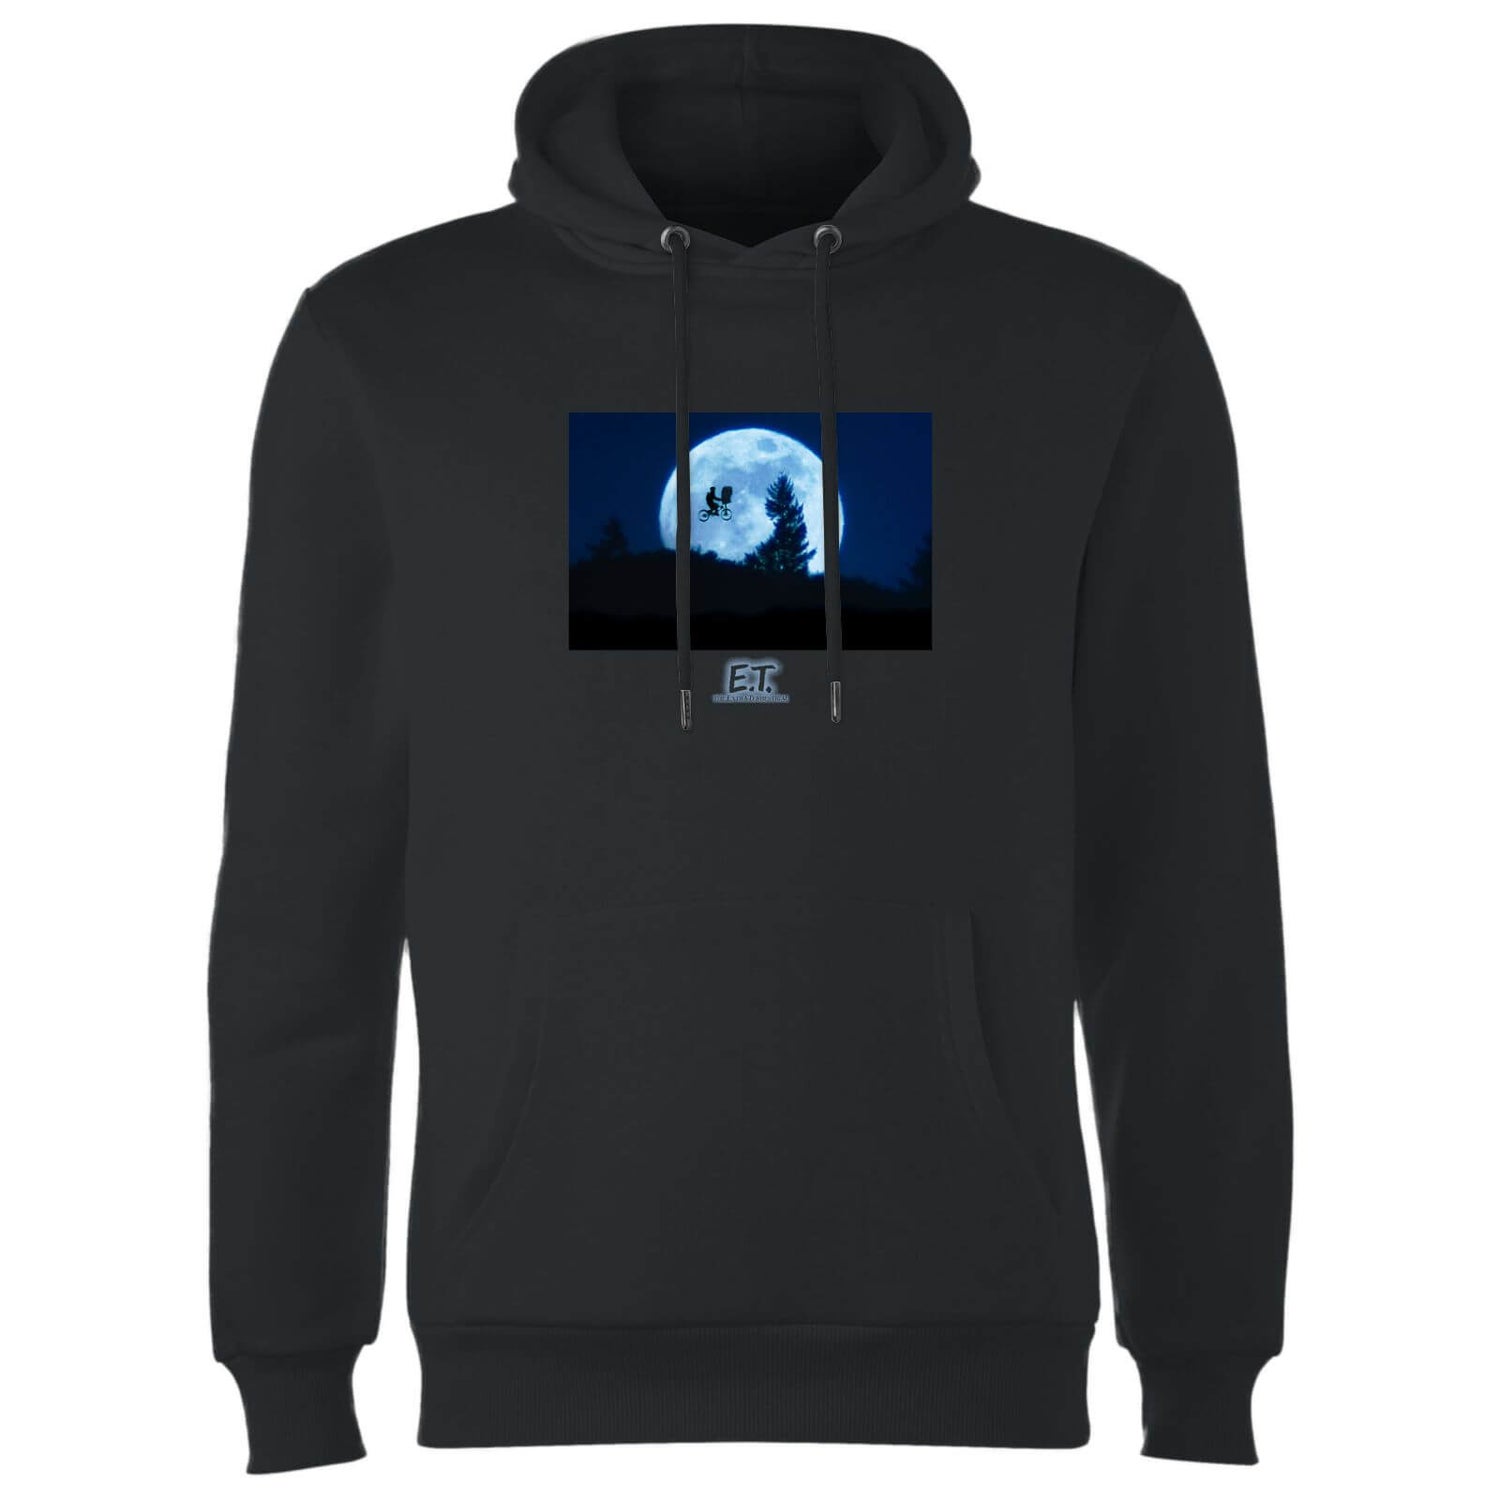 E.T. the Extra-Terrestrial Moon Cycle Hoodie - Black